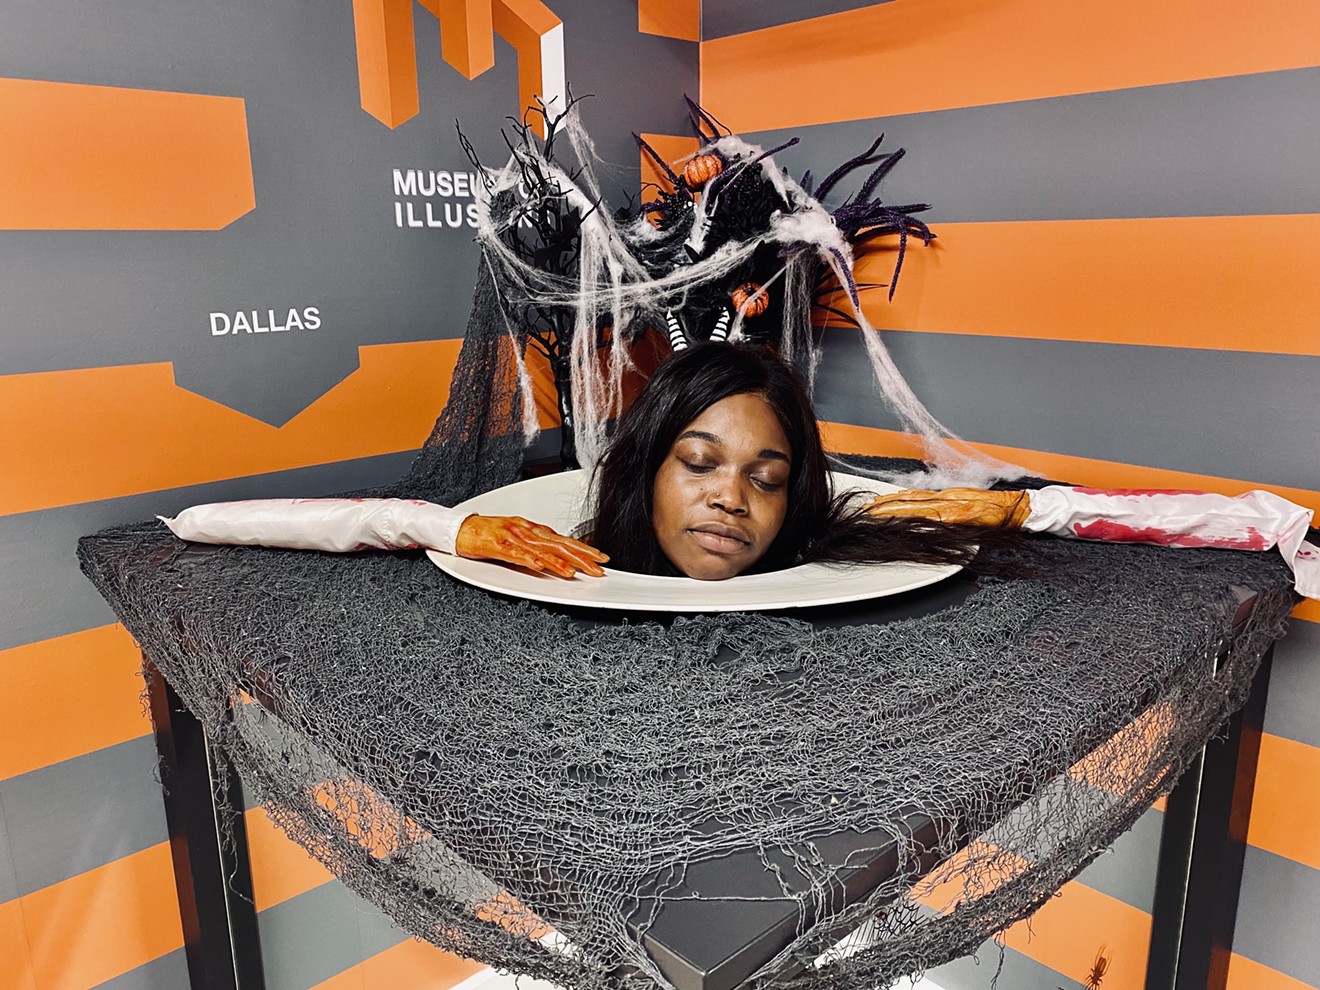 The Halloween Spooktacular at Museum of Illusions Dallas